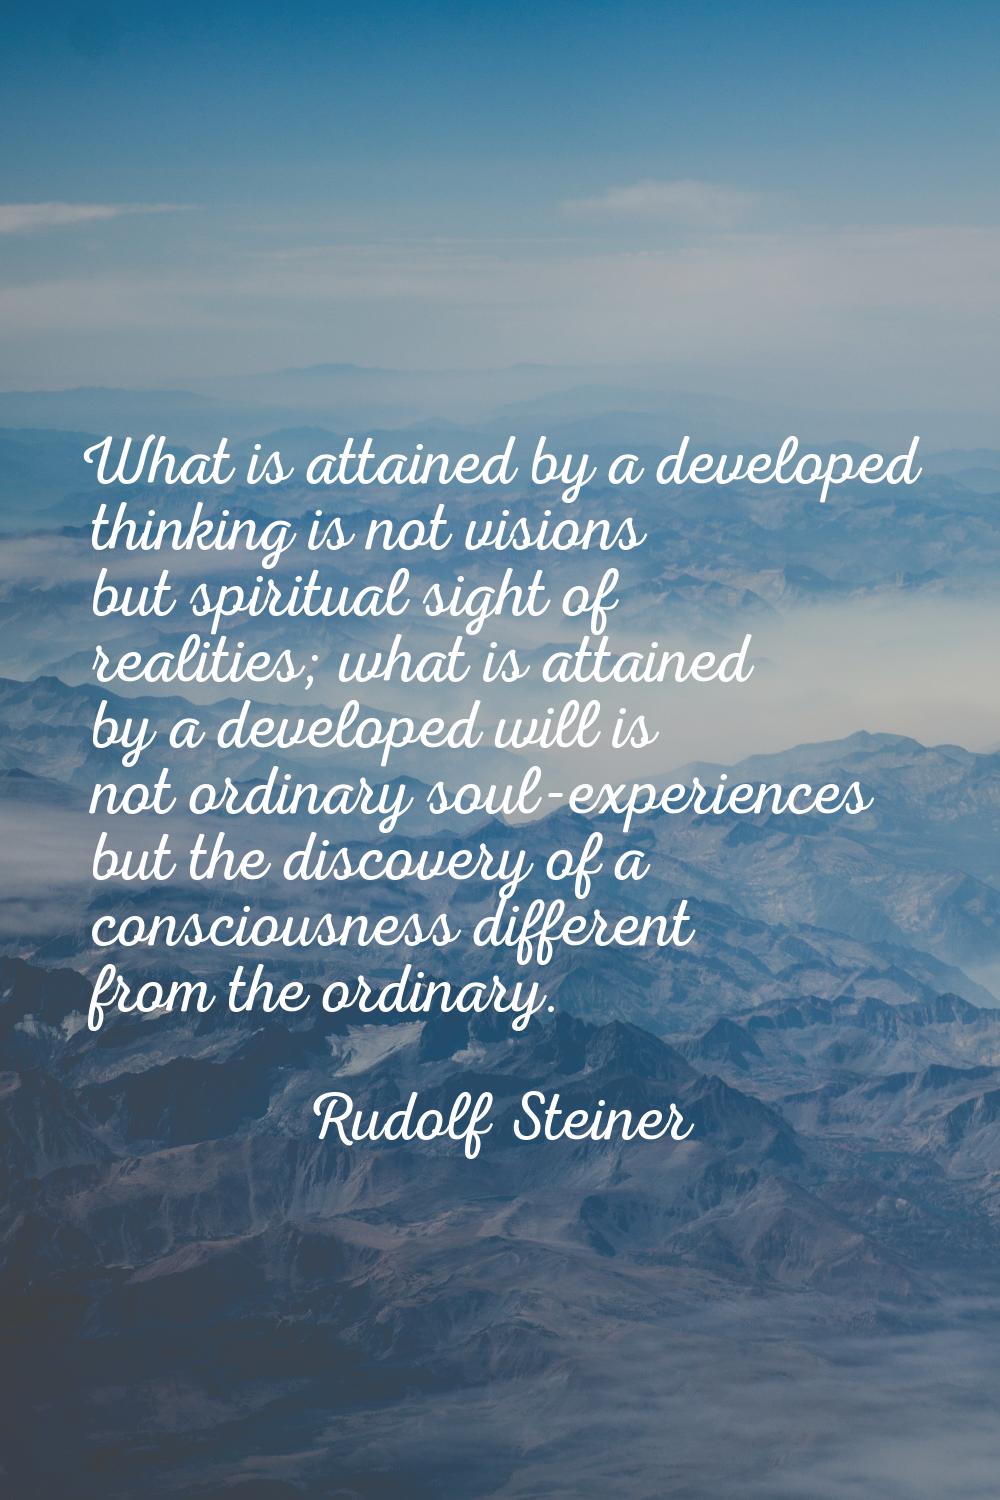 What is attained by a developed thinking is not visions but spiritual sight of realities; what is a